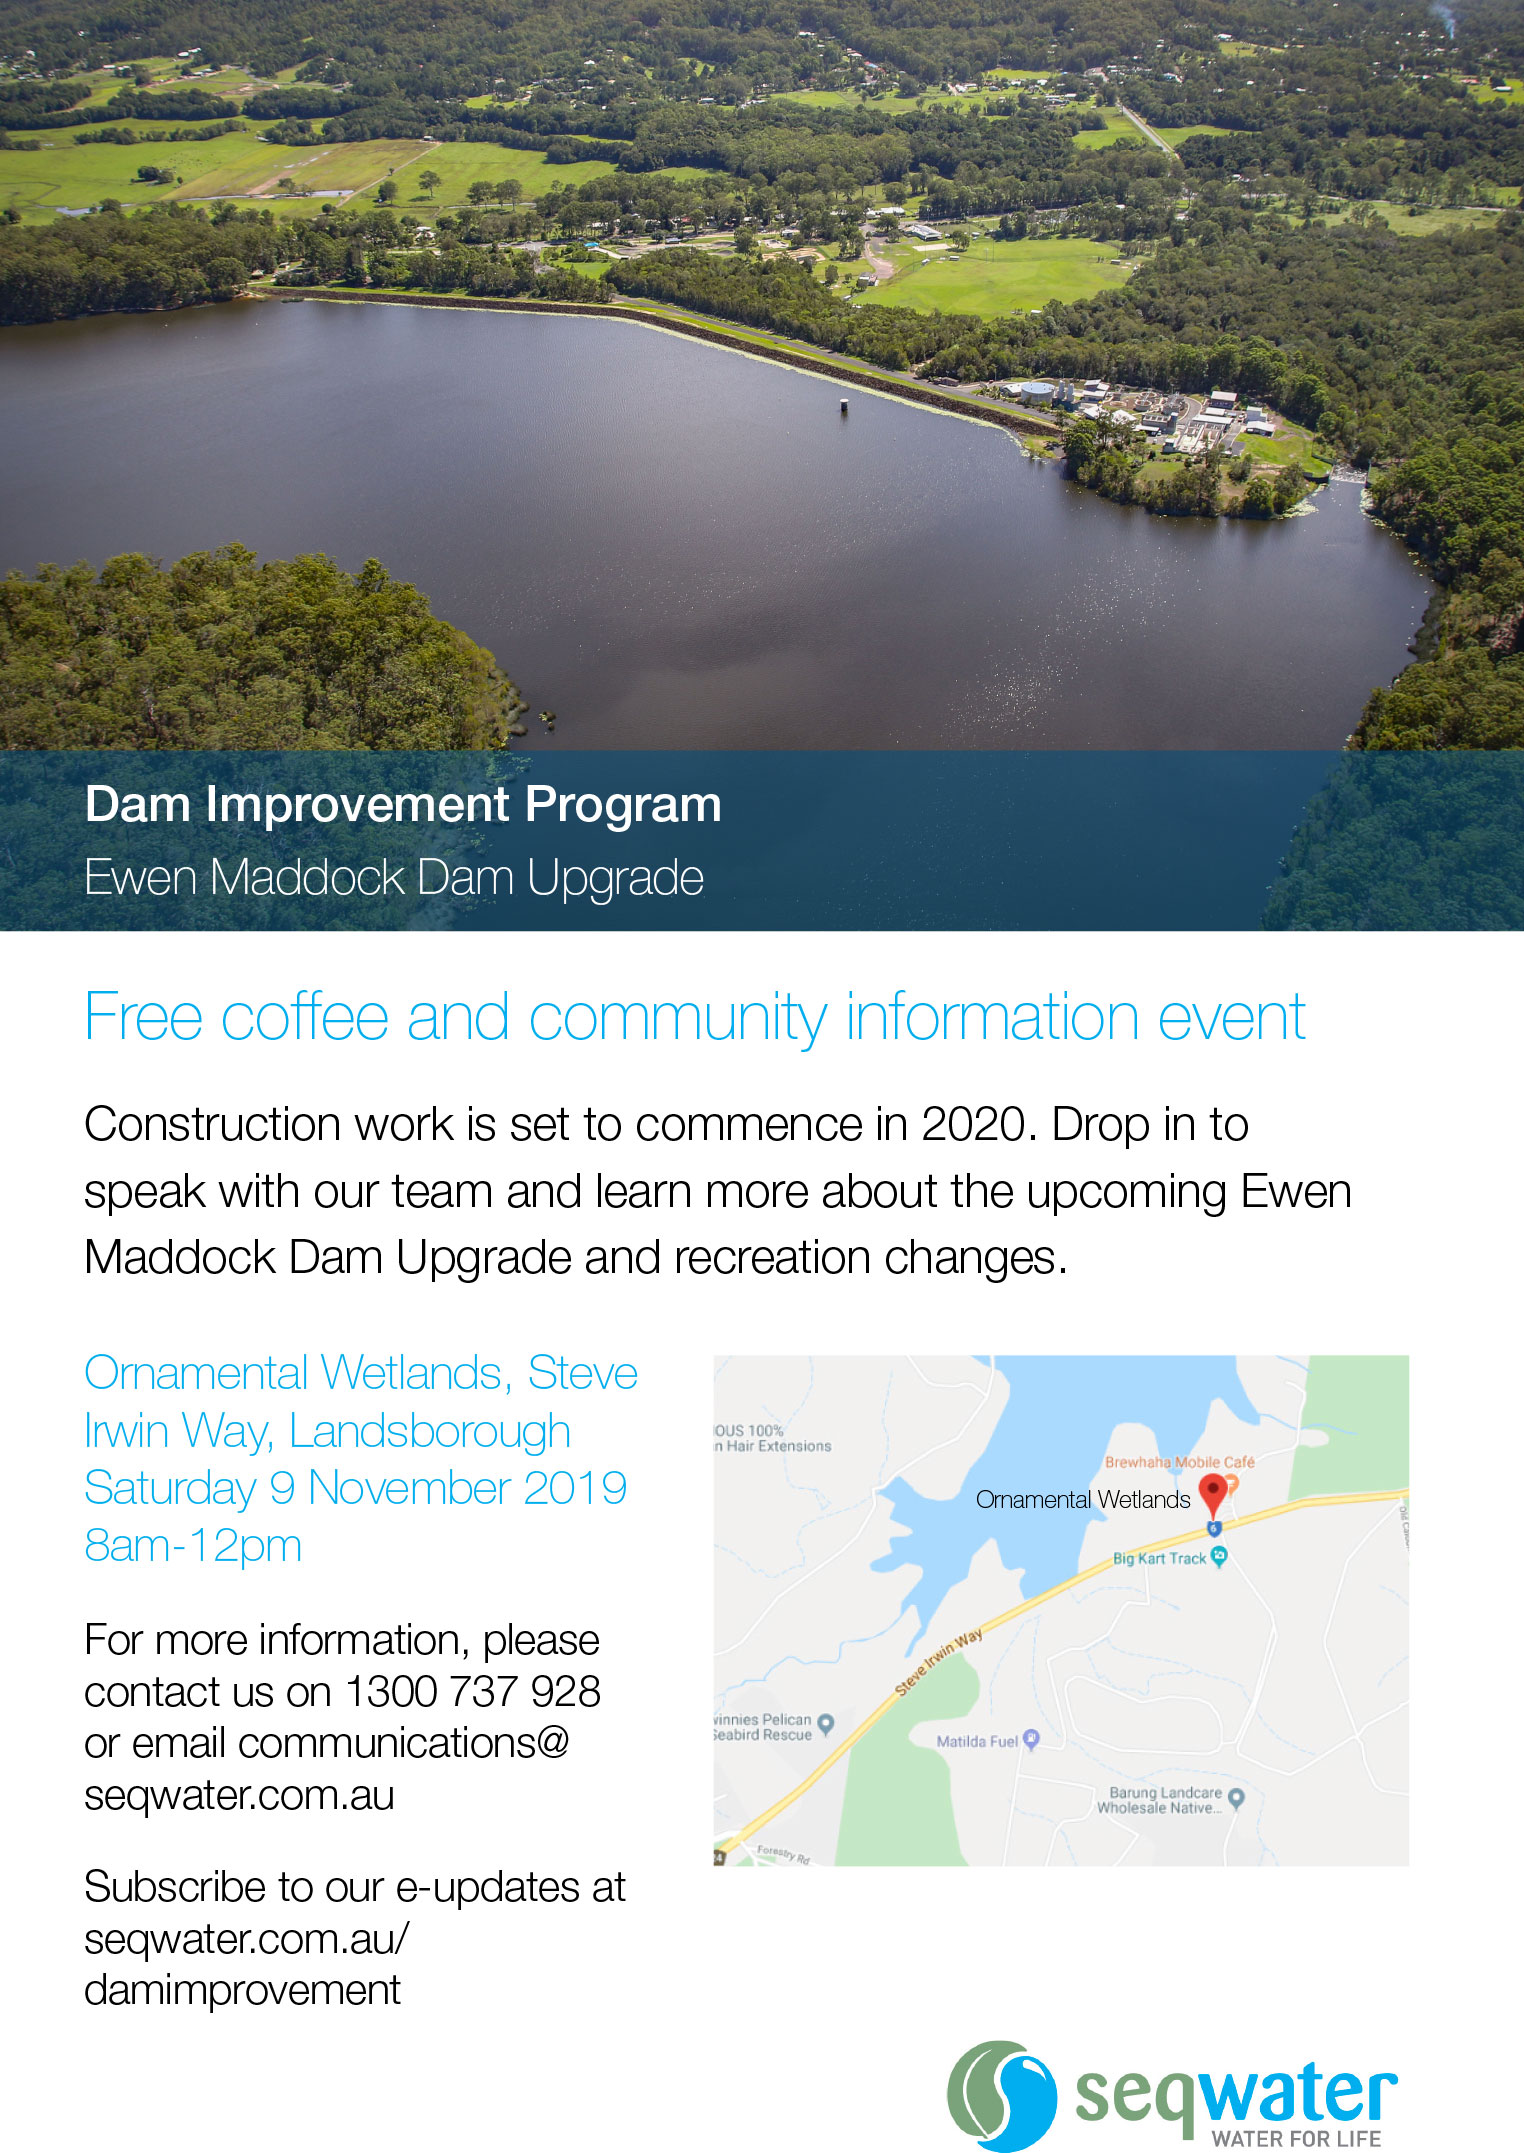 Community invitation to an information event about Ewen Maddock Dam upgrade